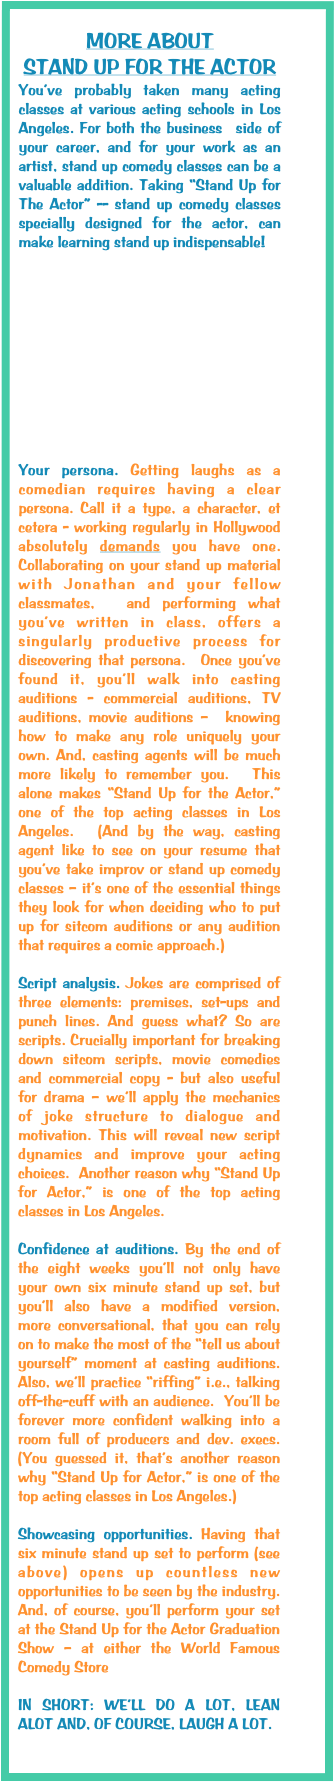 
MORE ABOUT 
STAND UP FOR THE ACTOR
You’ve probably taken many acting classes at various acting schools in Los Angeles. For both the business  side of your career, and for your work as an artist, stand up comedy classes can be a valuable addition. Taking “Stand Up for The Actor” -- stand up comedy classes specially designed for the actor, can make learning stand up indispensable! 











Your persona. Getting laughs as a comedian requires having a clear persona. Call it a type, a character, et cetera - working regularly in Hollywood absolutely demands you have one.  Collaborating on your stand up material with Jonathan and your fellow classmates,  and performing what you’ve written in class, offers a singularly productive process for discovering that persona.  Once you’ve found it, you’ll walk into casting auditions - commercial auditions, TV auditions, movie auditions –  knowing how to make any role uniquely your own. And, casting agents will be much more likely to remember you.  This alone makes “Stand Up for the Actor,” one of the top acting classes in Los Angeles.  (And by the way, casting agent like to see on your resume that you’ve take improv or stand up comedy classes – it’s one of the essential things they look for when deciding who to put up for sitcom auditions or any audition that requires a comic approach.) 

Script analysis. Jokes are comprised of three elements: premises, set-ups and punch lines. And guess what? So are scripts. Crucially important for breaking down sitcom scripts, movie comedies and commercial copy - but also useful for drama – we’ll apply the mechanics of joke structure to dialogue and motivation. This will reveal new script dynamics and improve your acting choices.  Another reason why “Stand Up for Actor,” is one of the top acting classes in Los Angeles. 

Confidence at auditions. By the end of the eight weeks you’ll not only have your own six minute stand up set, but you’ll also have a modified version, more conversational, that you can rely on to make the most of the “tell us about yourself” moment at casting auditions. Also, we’ll practice “riffing” i.e., talking off-the-cuff with an audience.  You’ll be forever more confident walking into a room full of producers and dev. execs. (You guessed it, that’s another reason why “Stand Up for Actor,” is one of the top acting classes in Los Angeles.)

Showcasing opportunities. Having that six minute stand up set to perform (see above) opens up countless new opportunities to be seen by the industry. And, of course, you’ll perform your set at the Stand Up for the Actor Graduation Show – at either the World Famous Comedy Store 

IN SHORT: WE’LL DO A LOT, LEAN ALOT AND, OF COURSE, LAUGH A LOT. 